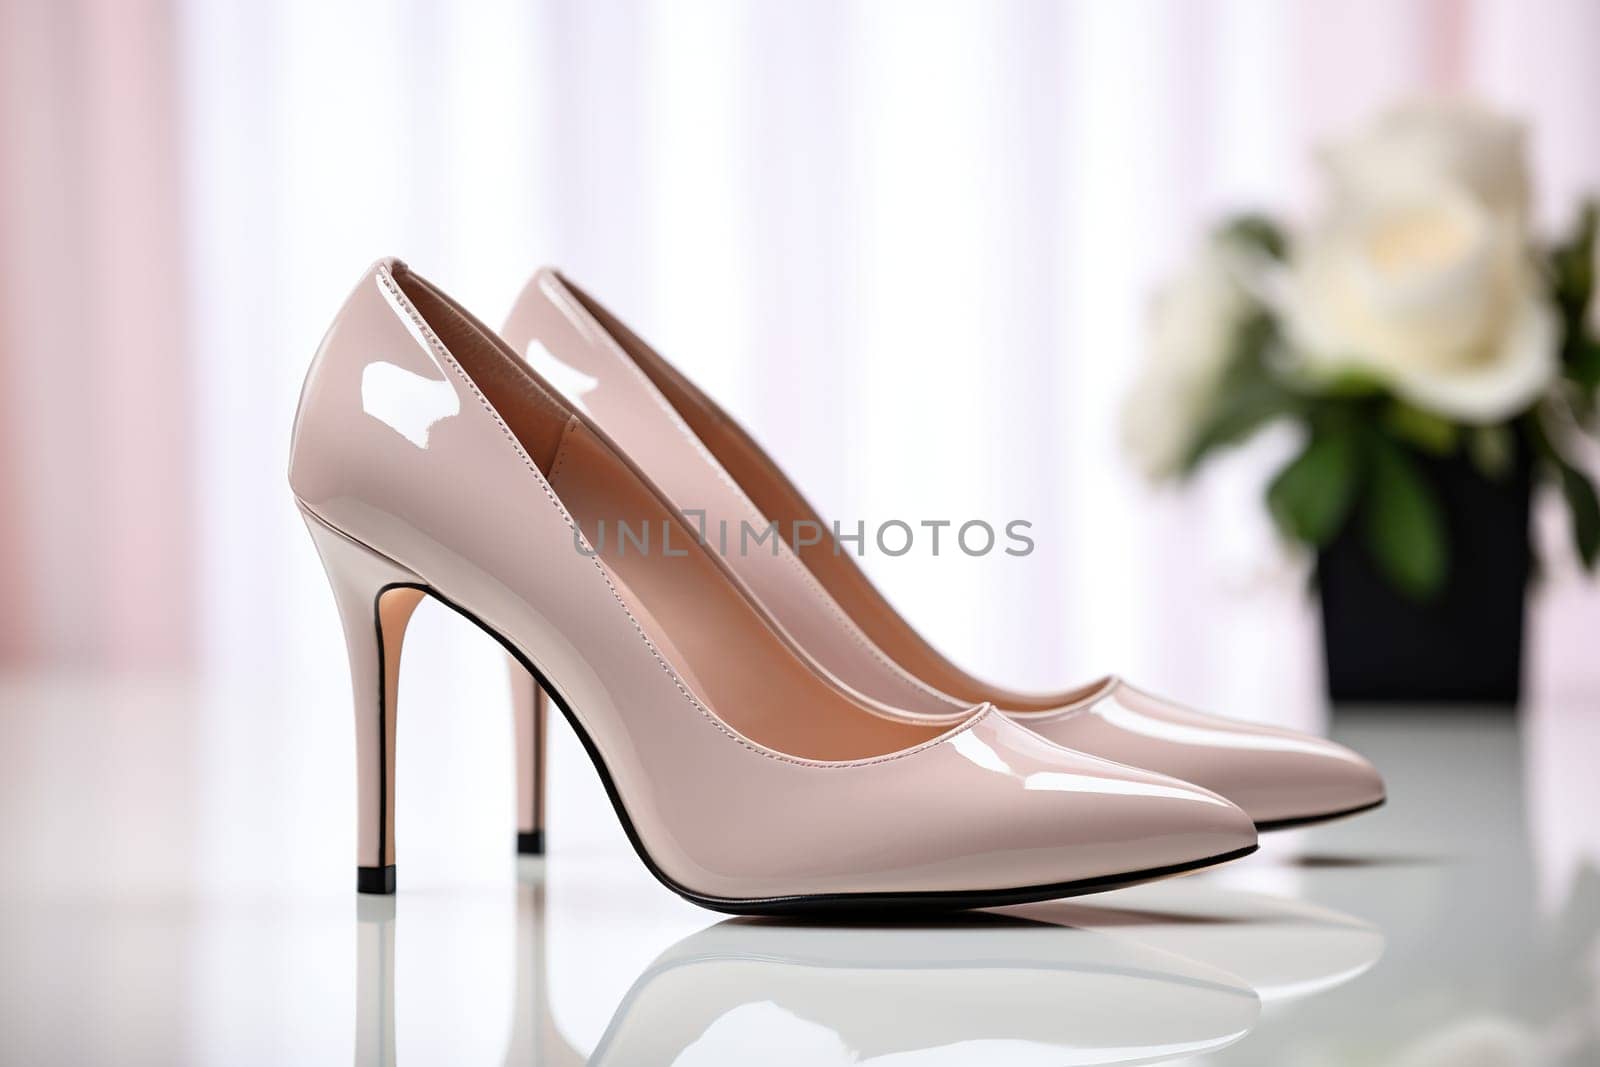 Elegant women's shoes made of light leather with a bouquet of roses on a mirror surface. Women's wedding shoes, side view. by Vovmar